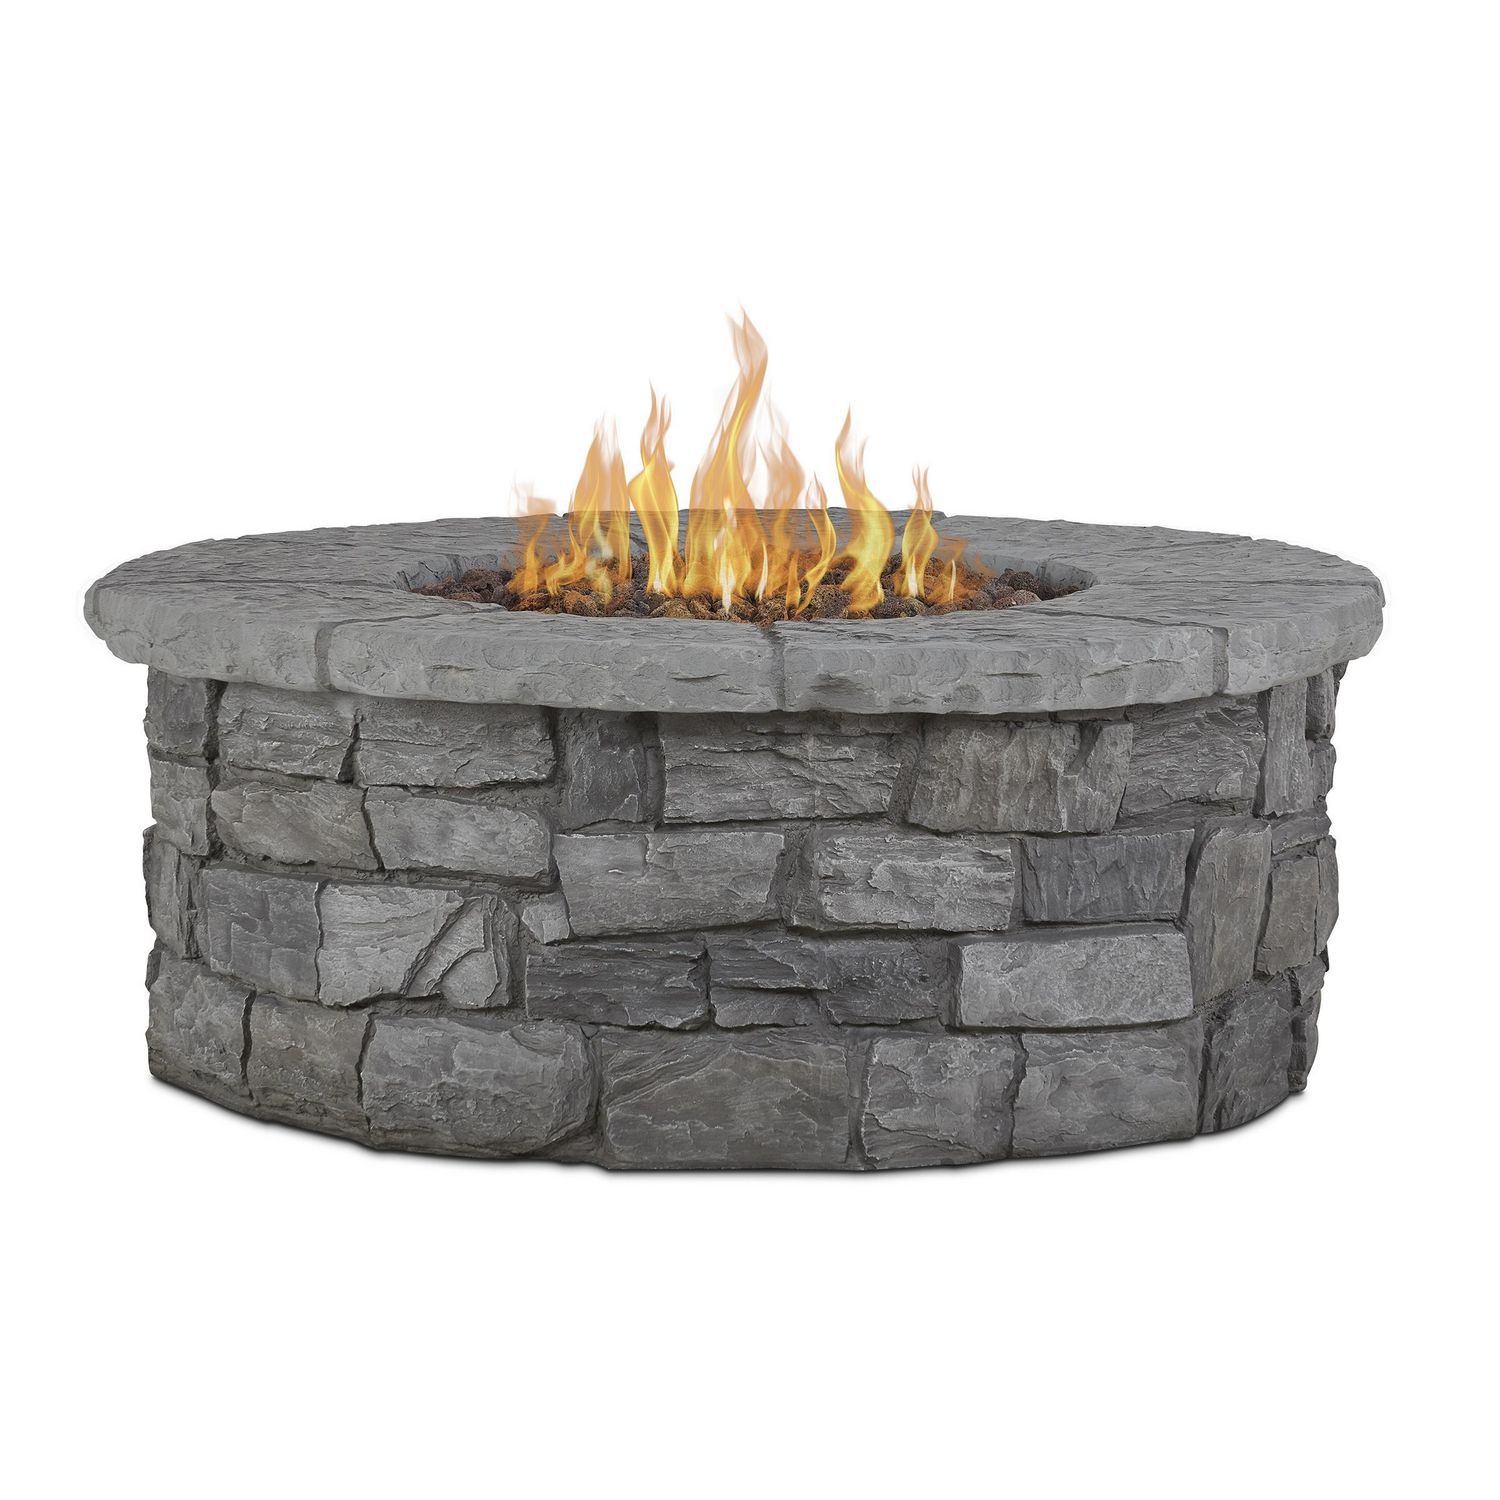 Sedona Round Propane Fire Table In Gray, Natural Gas Stone Fire Pit Kit